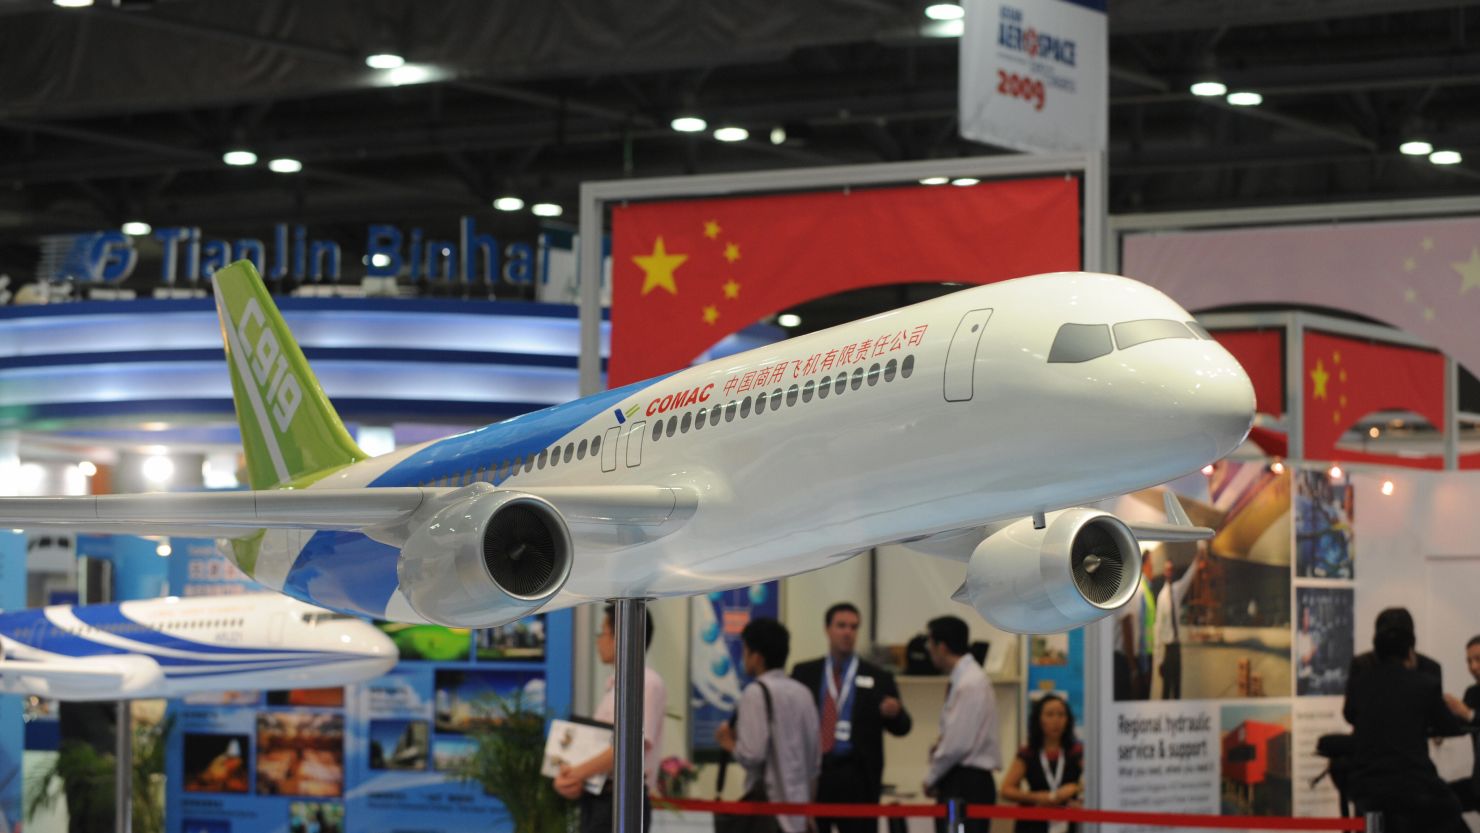 Small model, big ambitions: China hopes the C919 will break the dominance of Boeing and Airbus